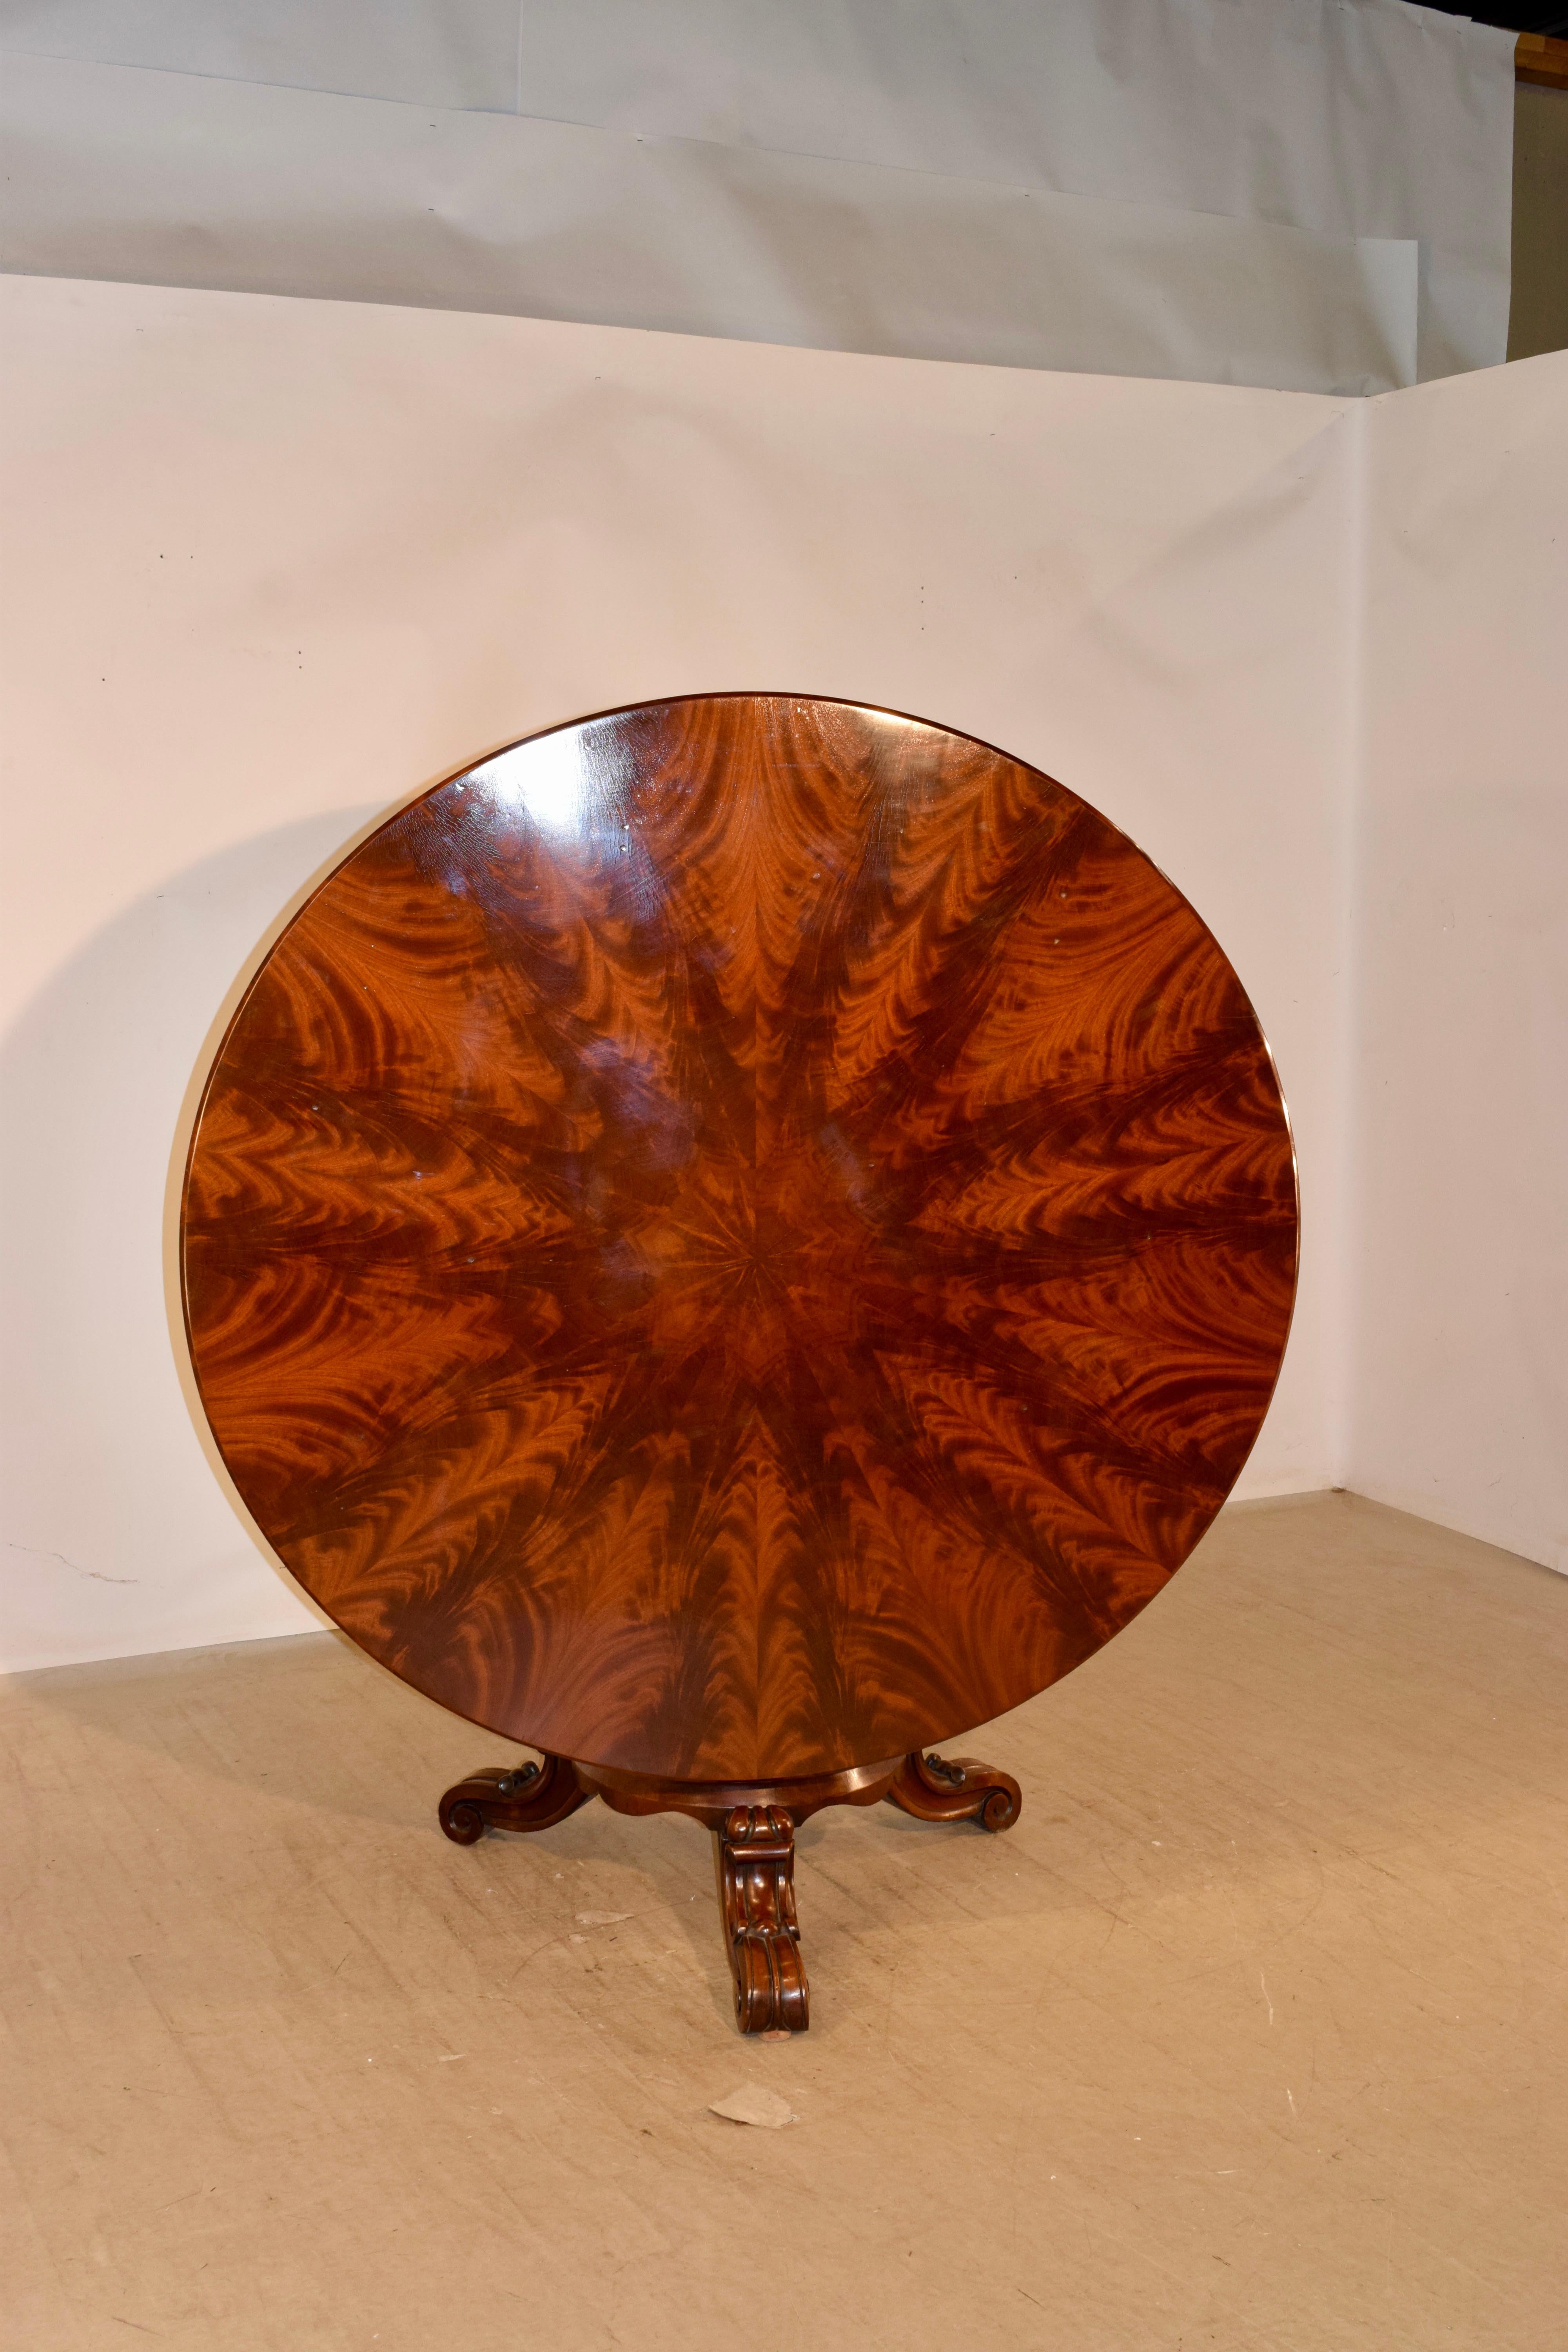 19th century English tilt-top table made from mahogany. The top is made from the most glorious flame mahogany and has been placed in a pattern to look like a starburst. It is one of the finest tables we have ever had the pleasure to offer. The top